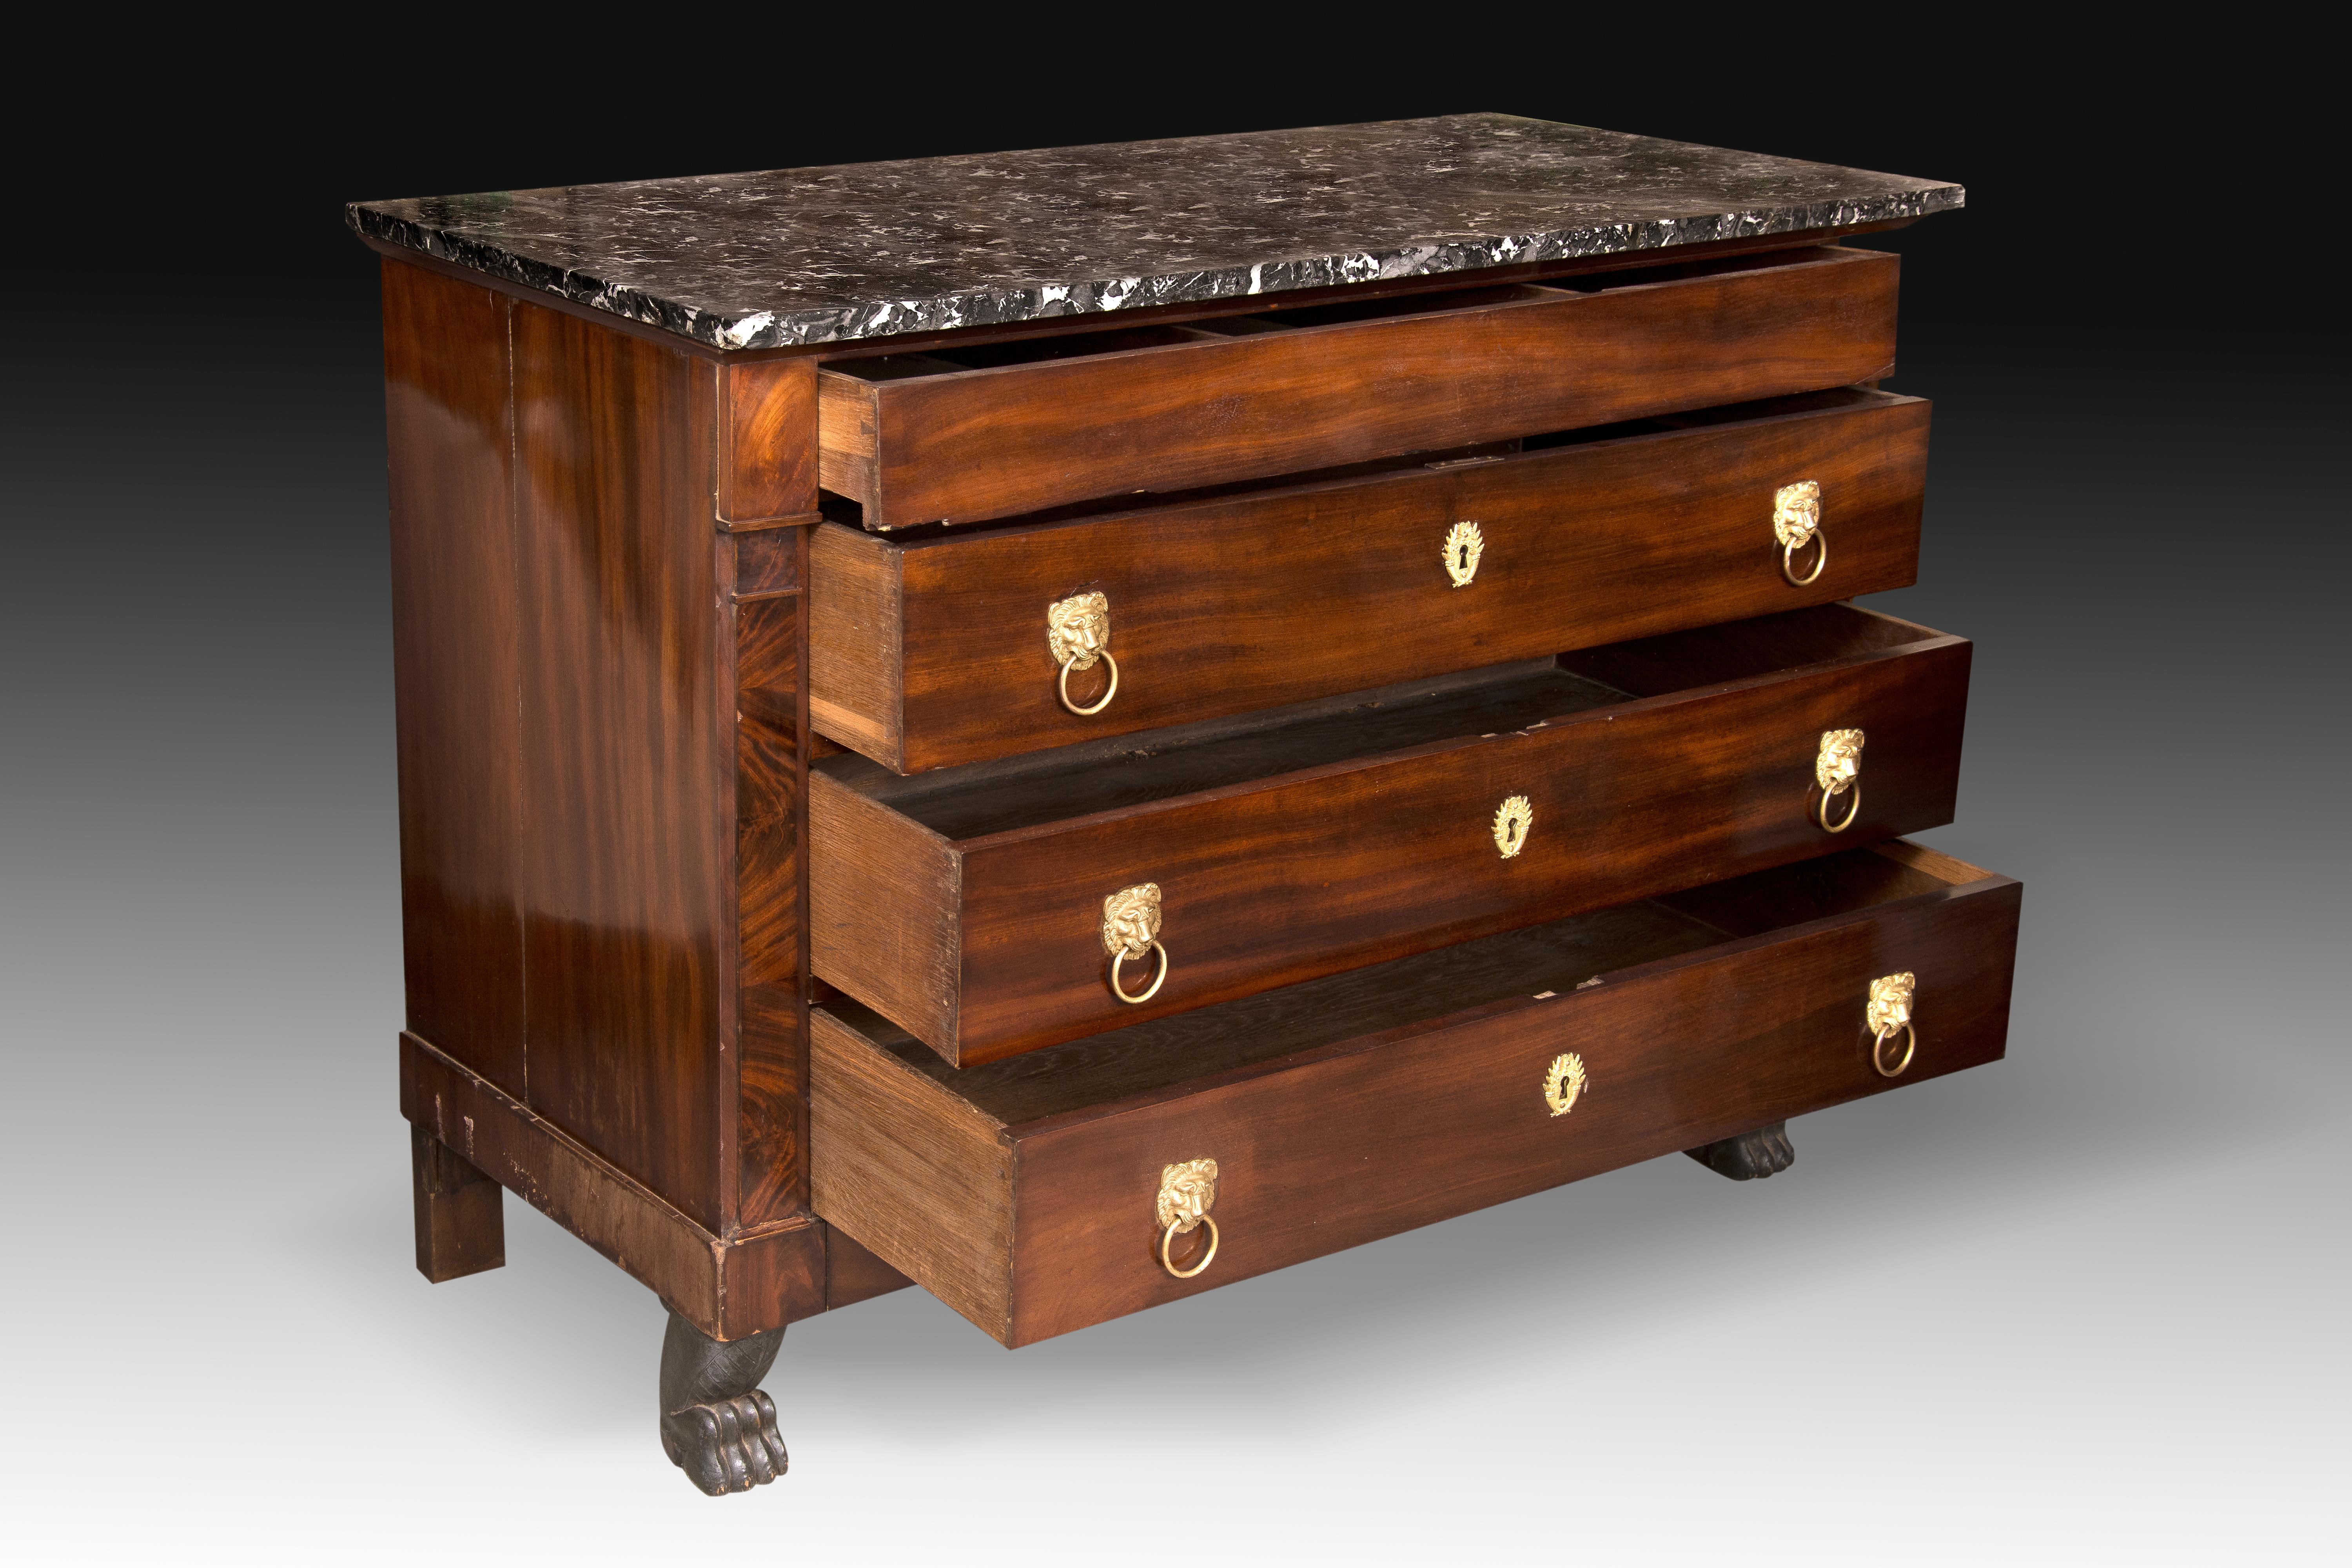 Empire commode. Mahogany, oak, ormolu bronze, Saint Anne marble. France, 19th century.
Rectangular chest of drawers with top board in Sainte Anne marble, made of carved mahogany and oak, with three drawers at the front, decorated on the front with